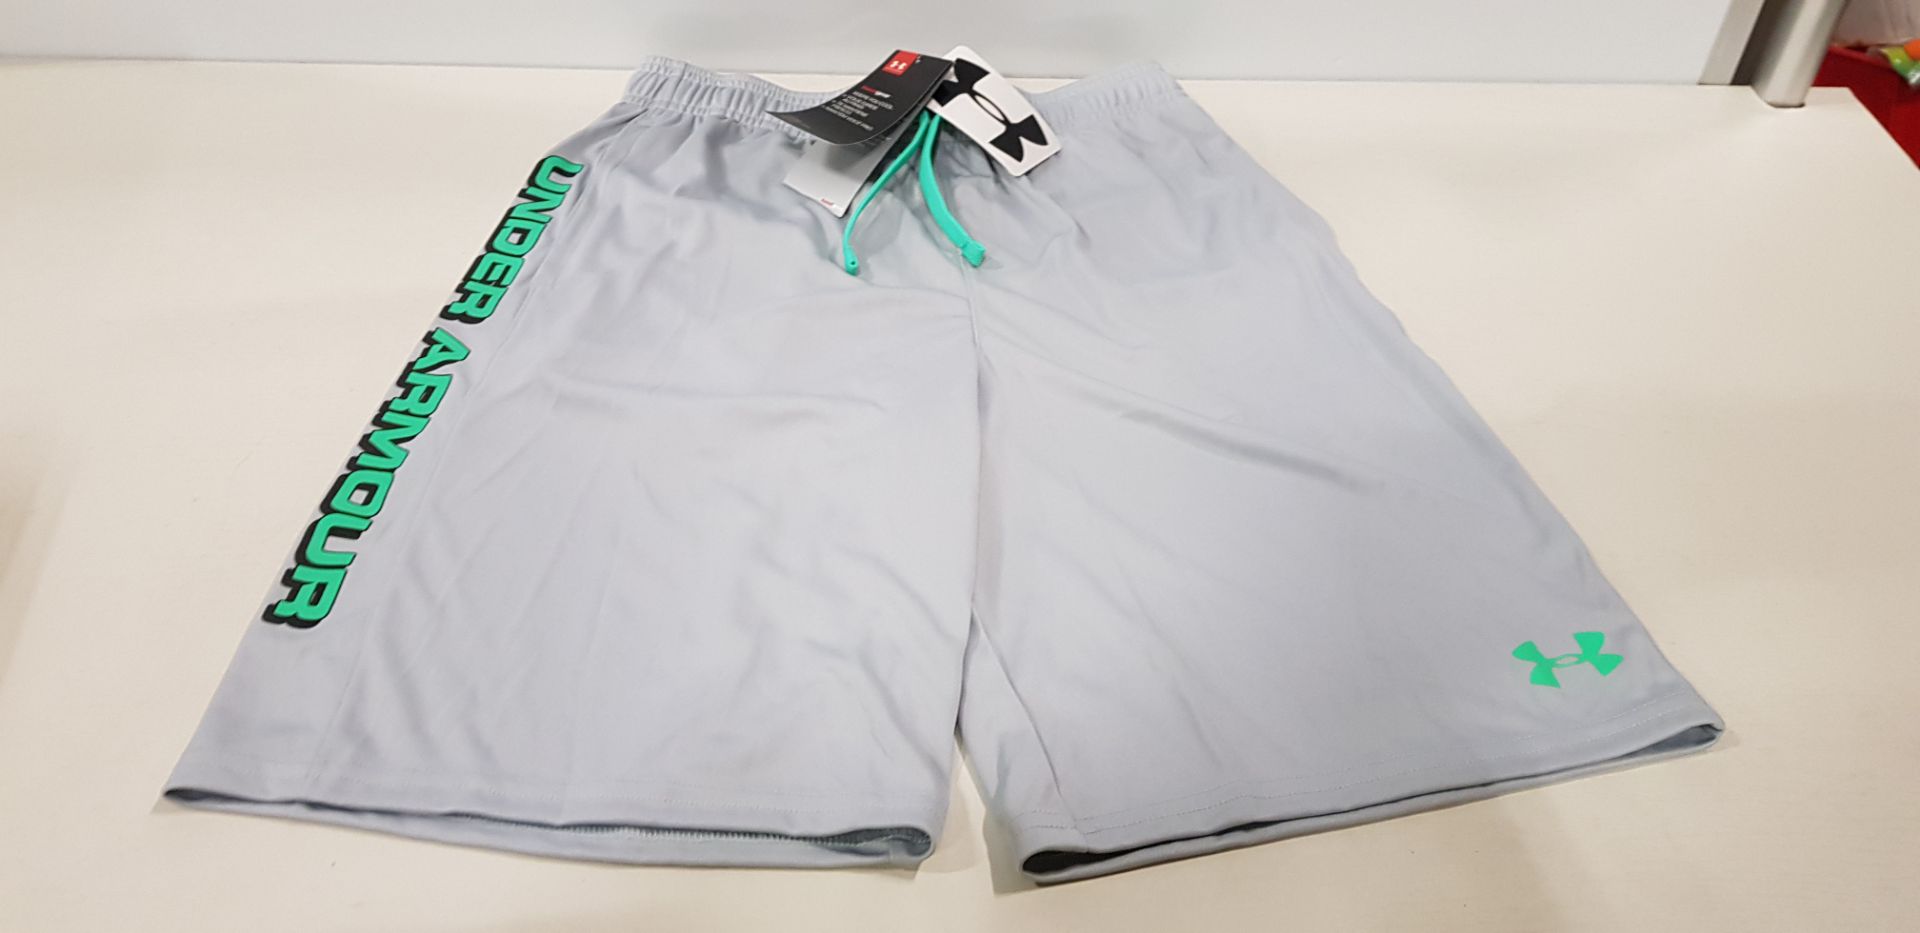 16 X BRAND NEW UNDER ARMOUR GREY SHORTS SIZE YOUTH XL